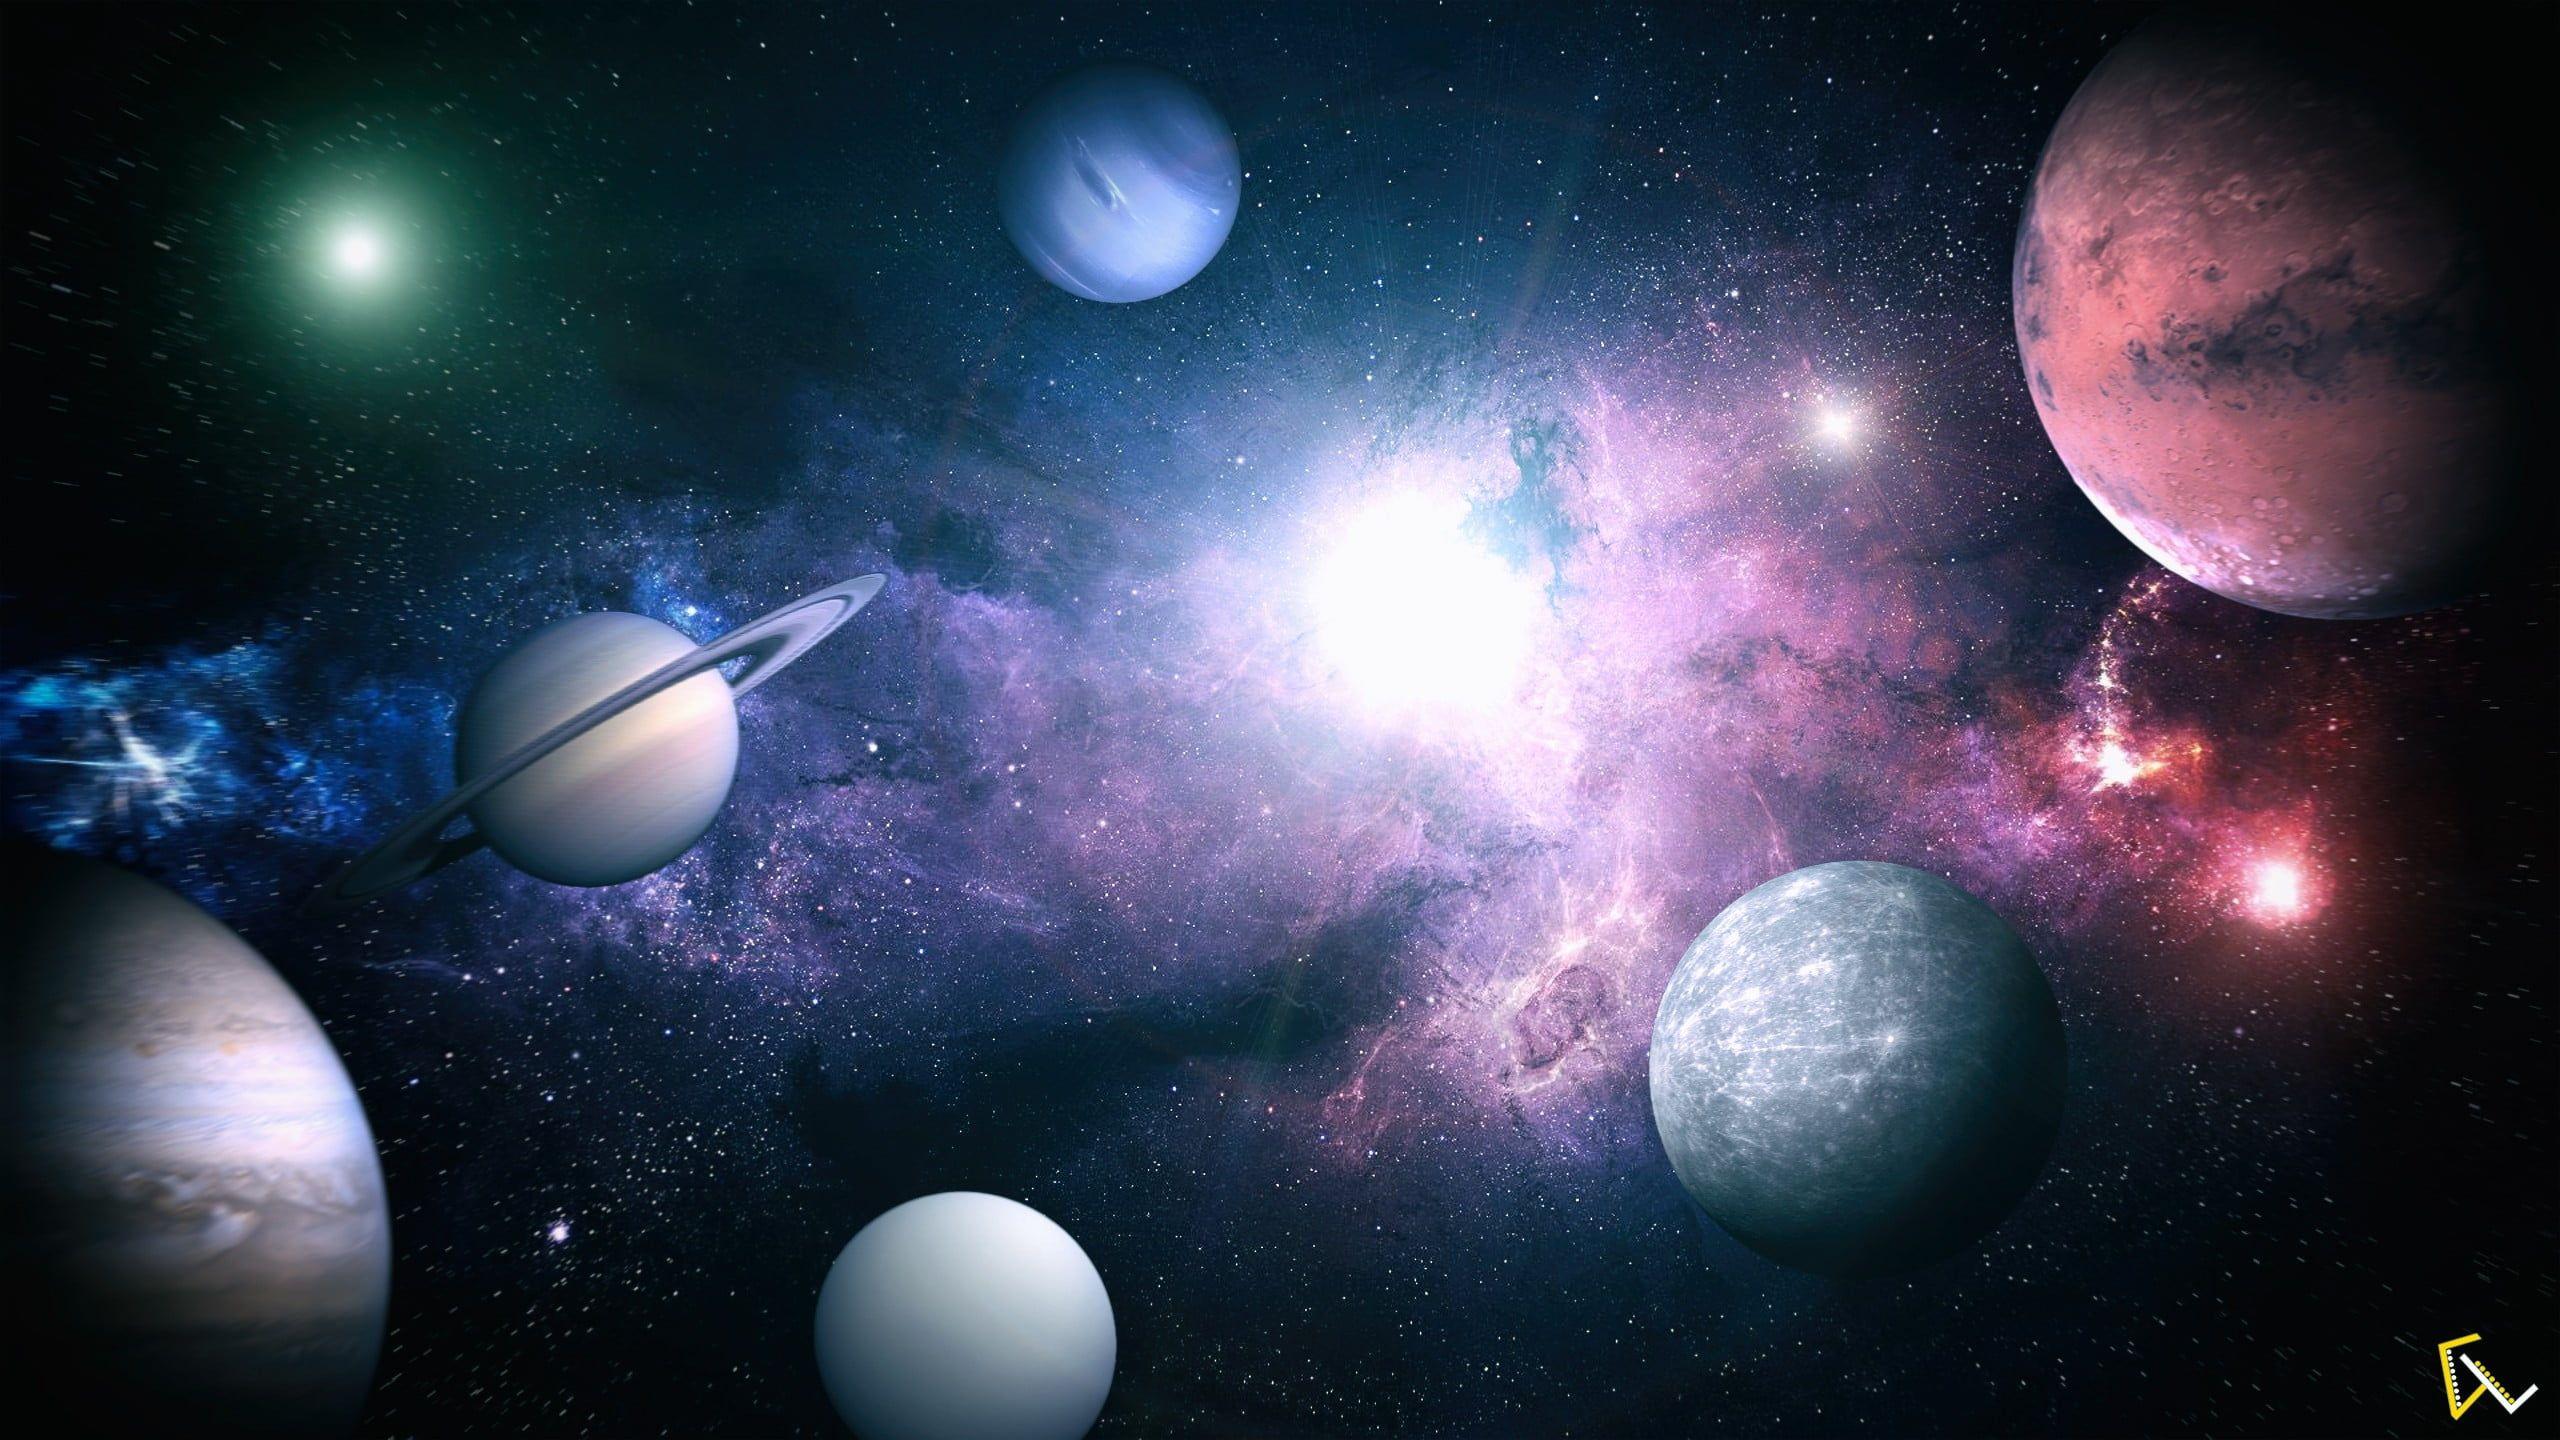 Solar System Planets Wallpapers Top Free Solar System Planets Backgrounds Wallpaperaccess 5381